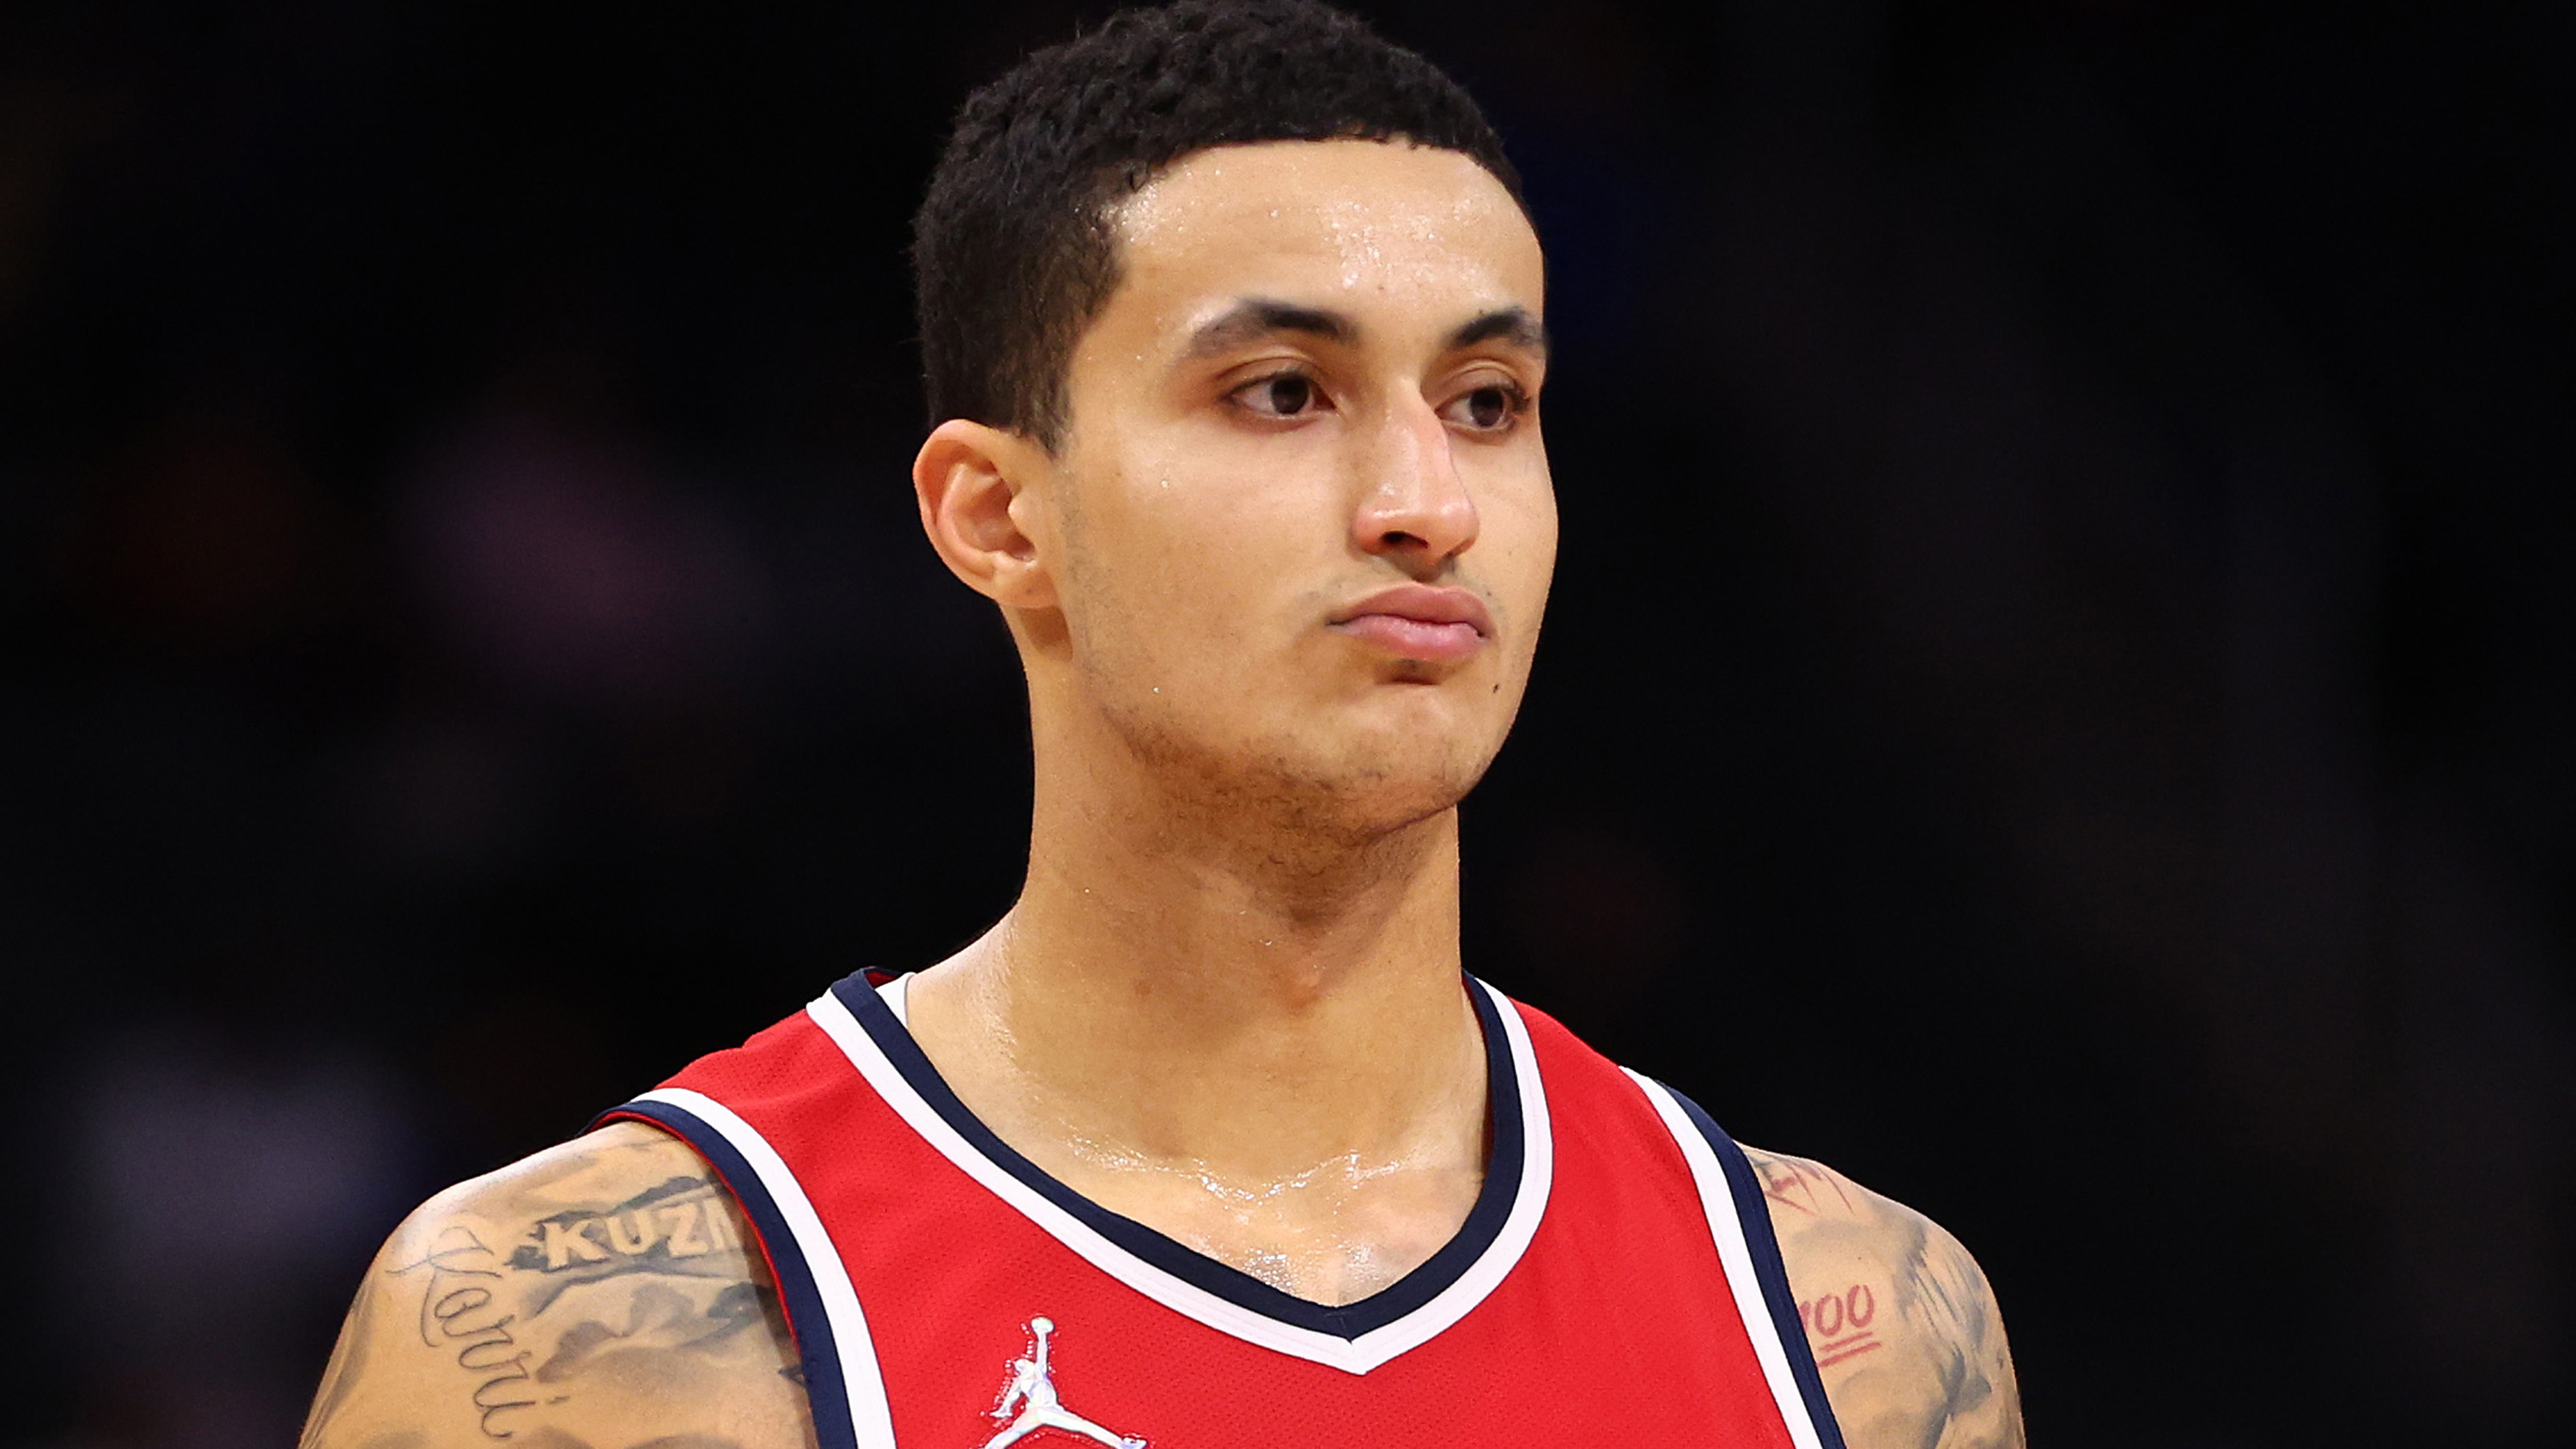 Wizards to have Kuzma pink sweater bobblehead giveaway